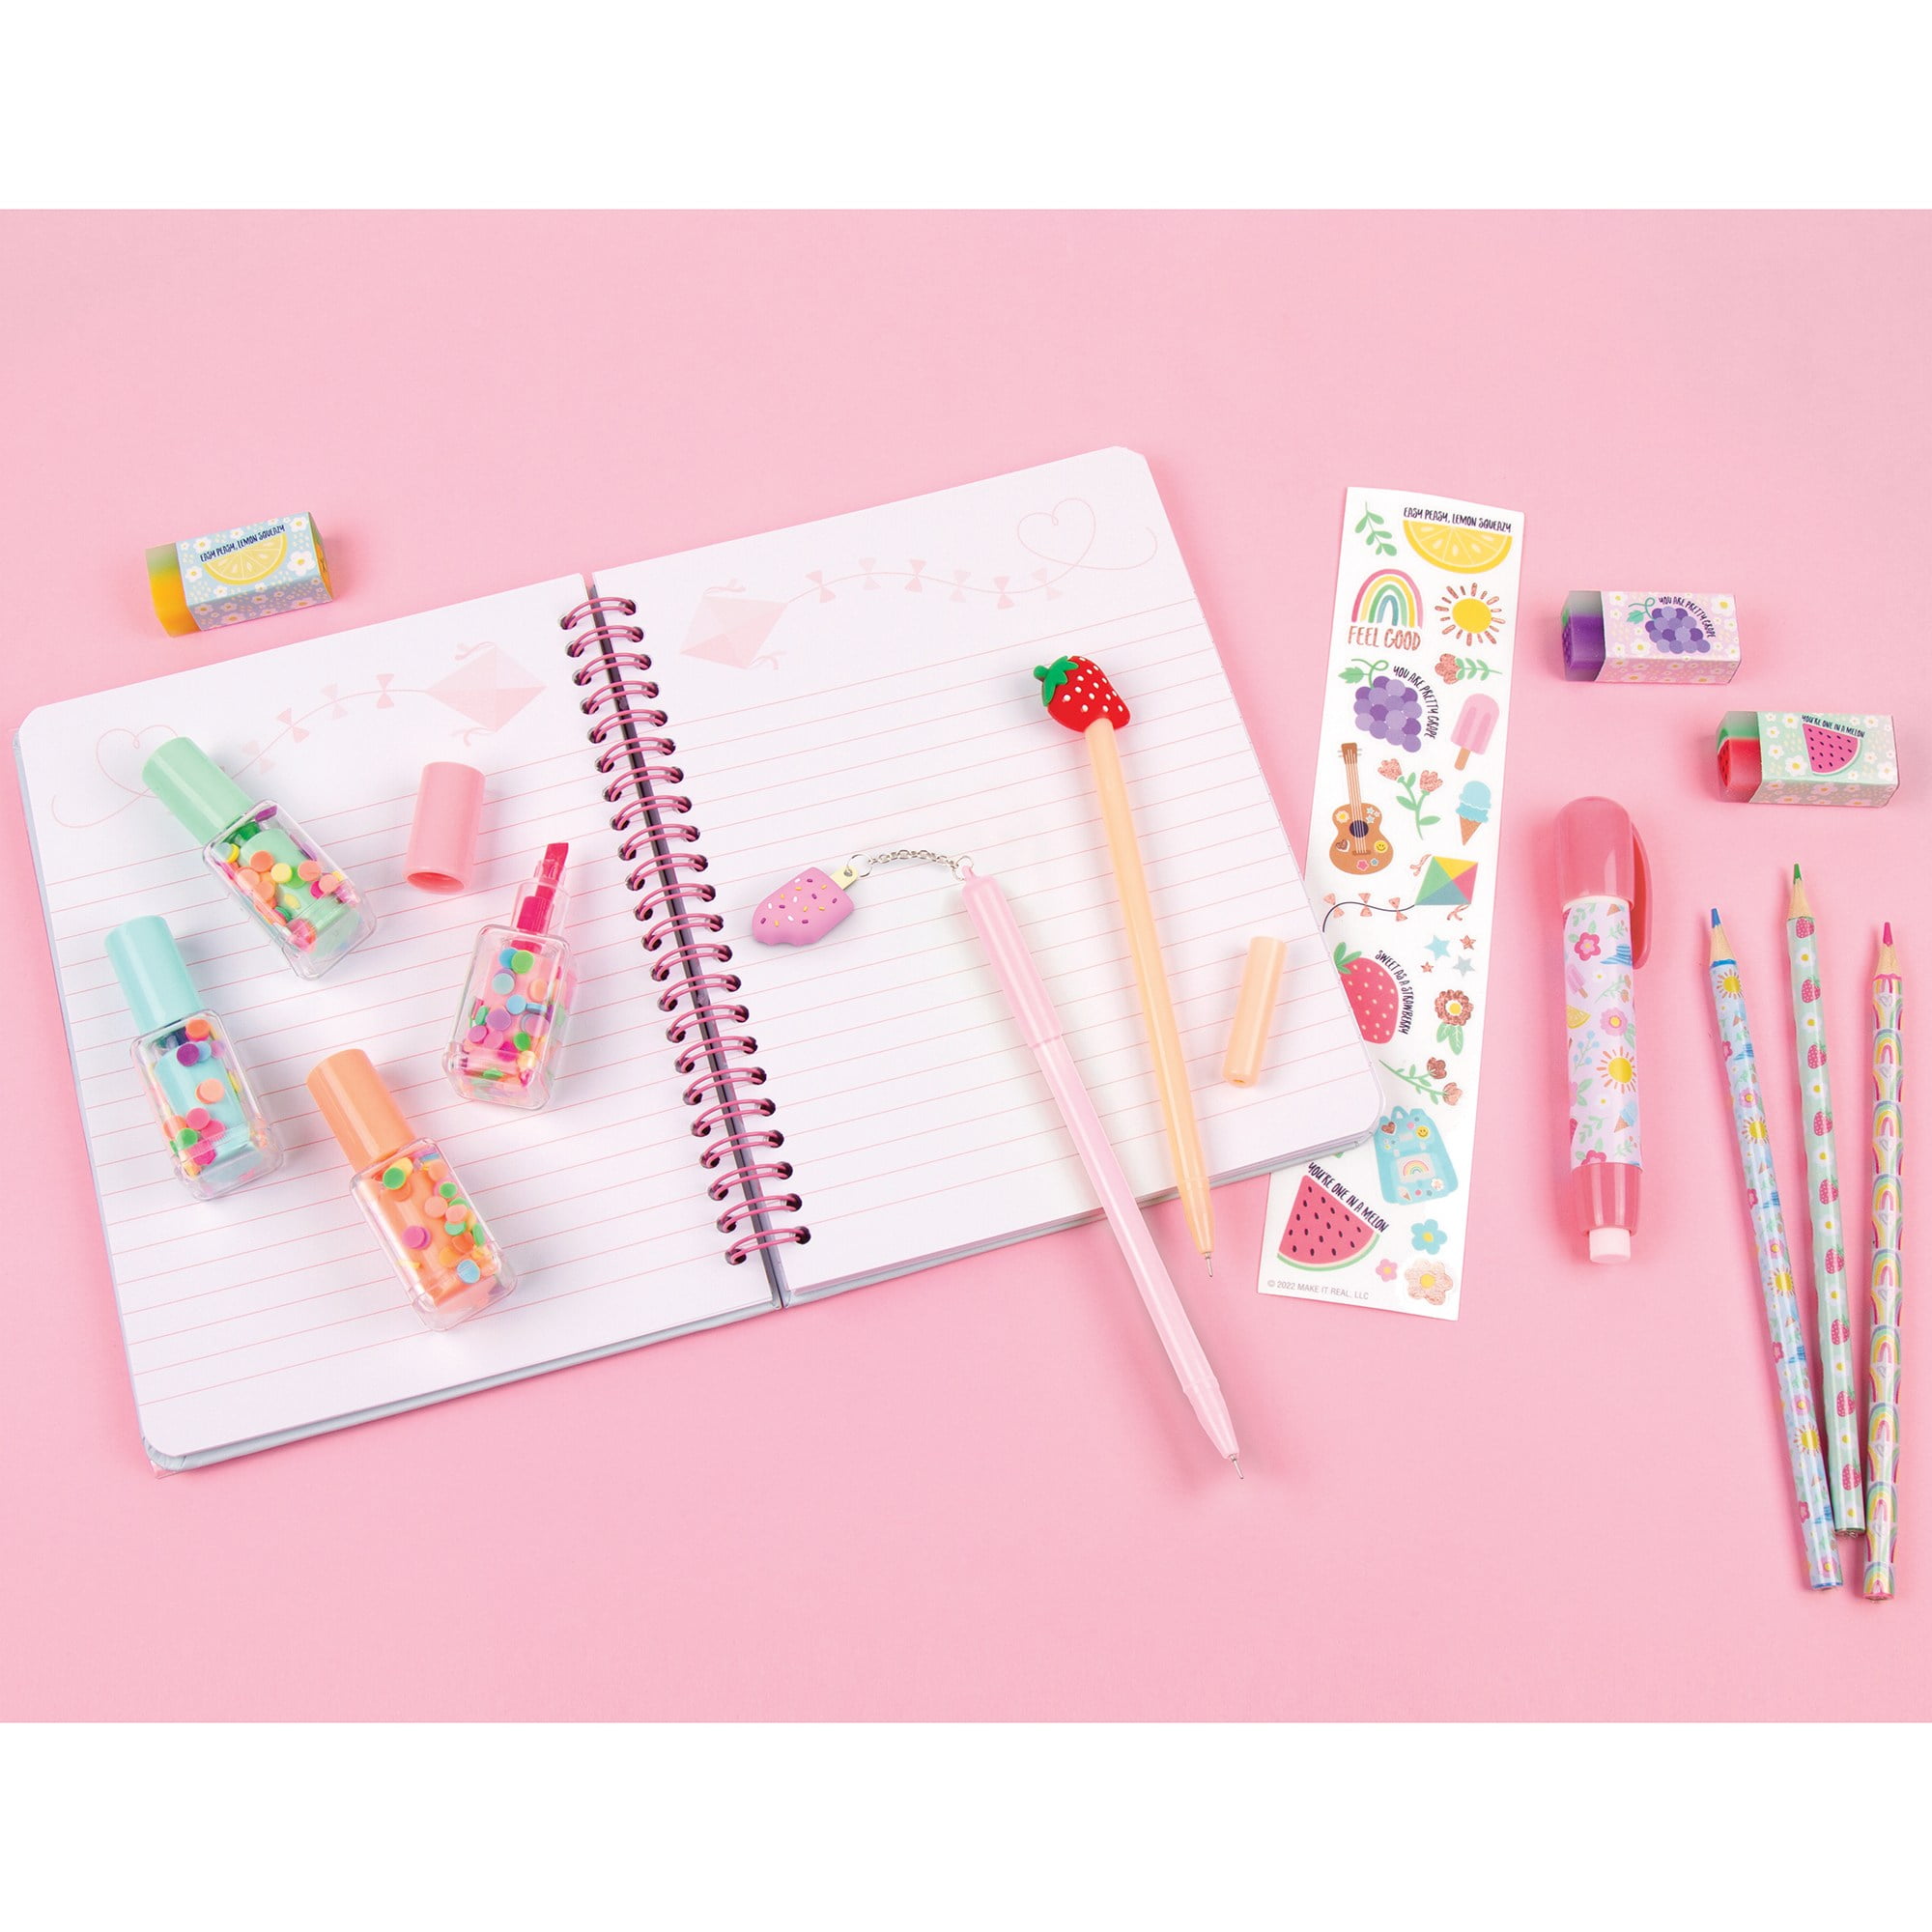 Wholesale cute stationery set With All Desktop Essentials